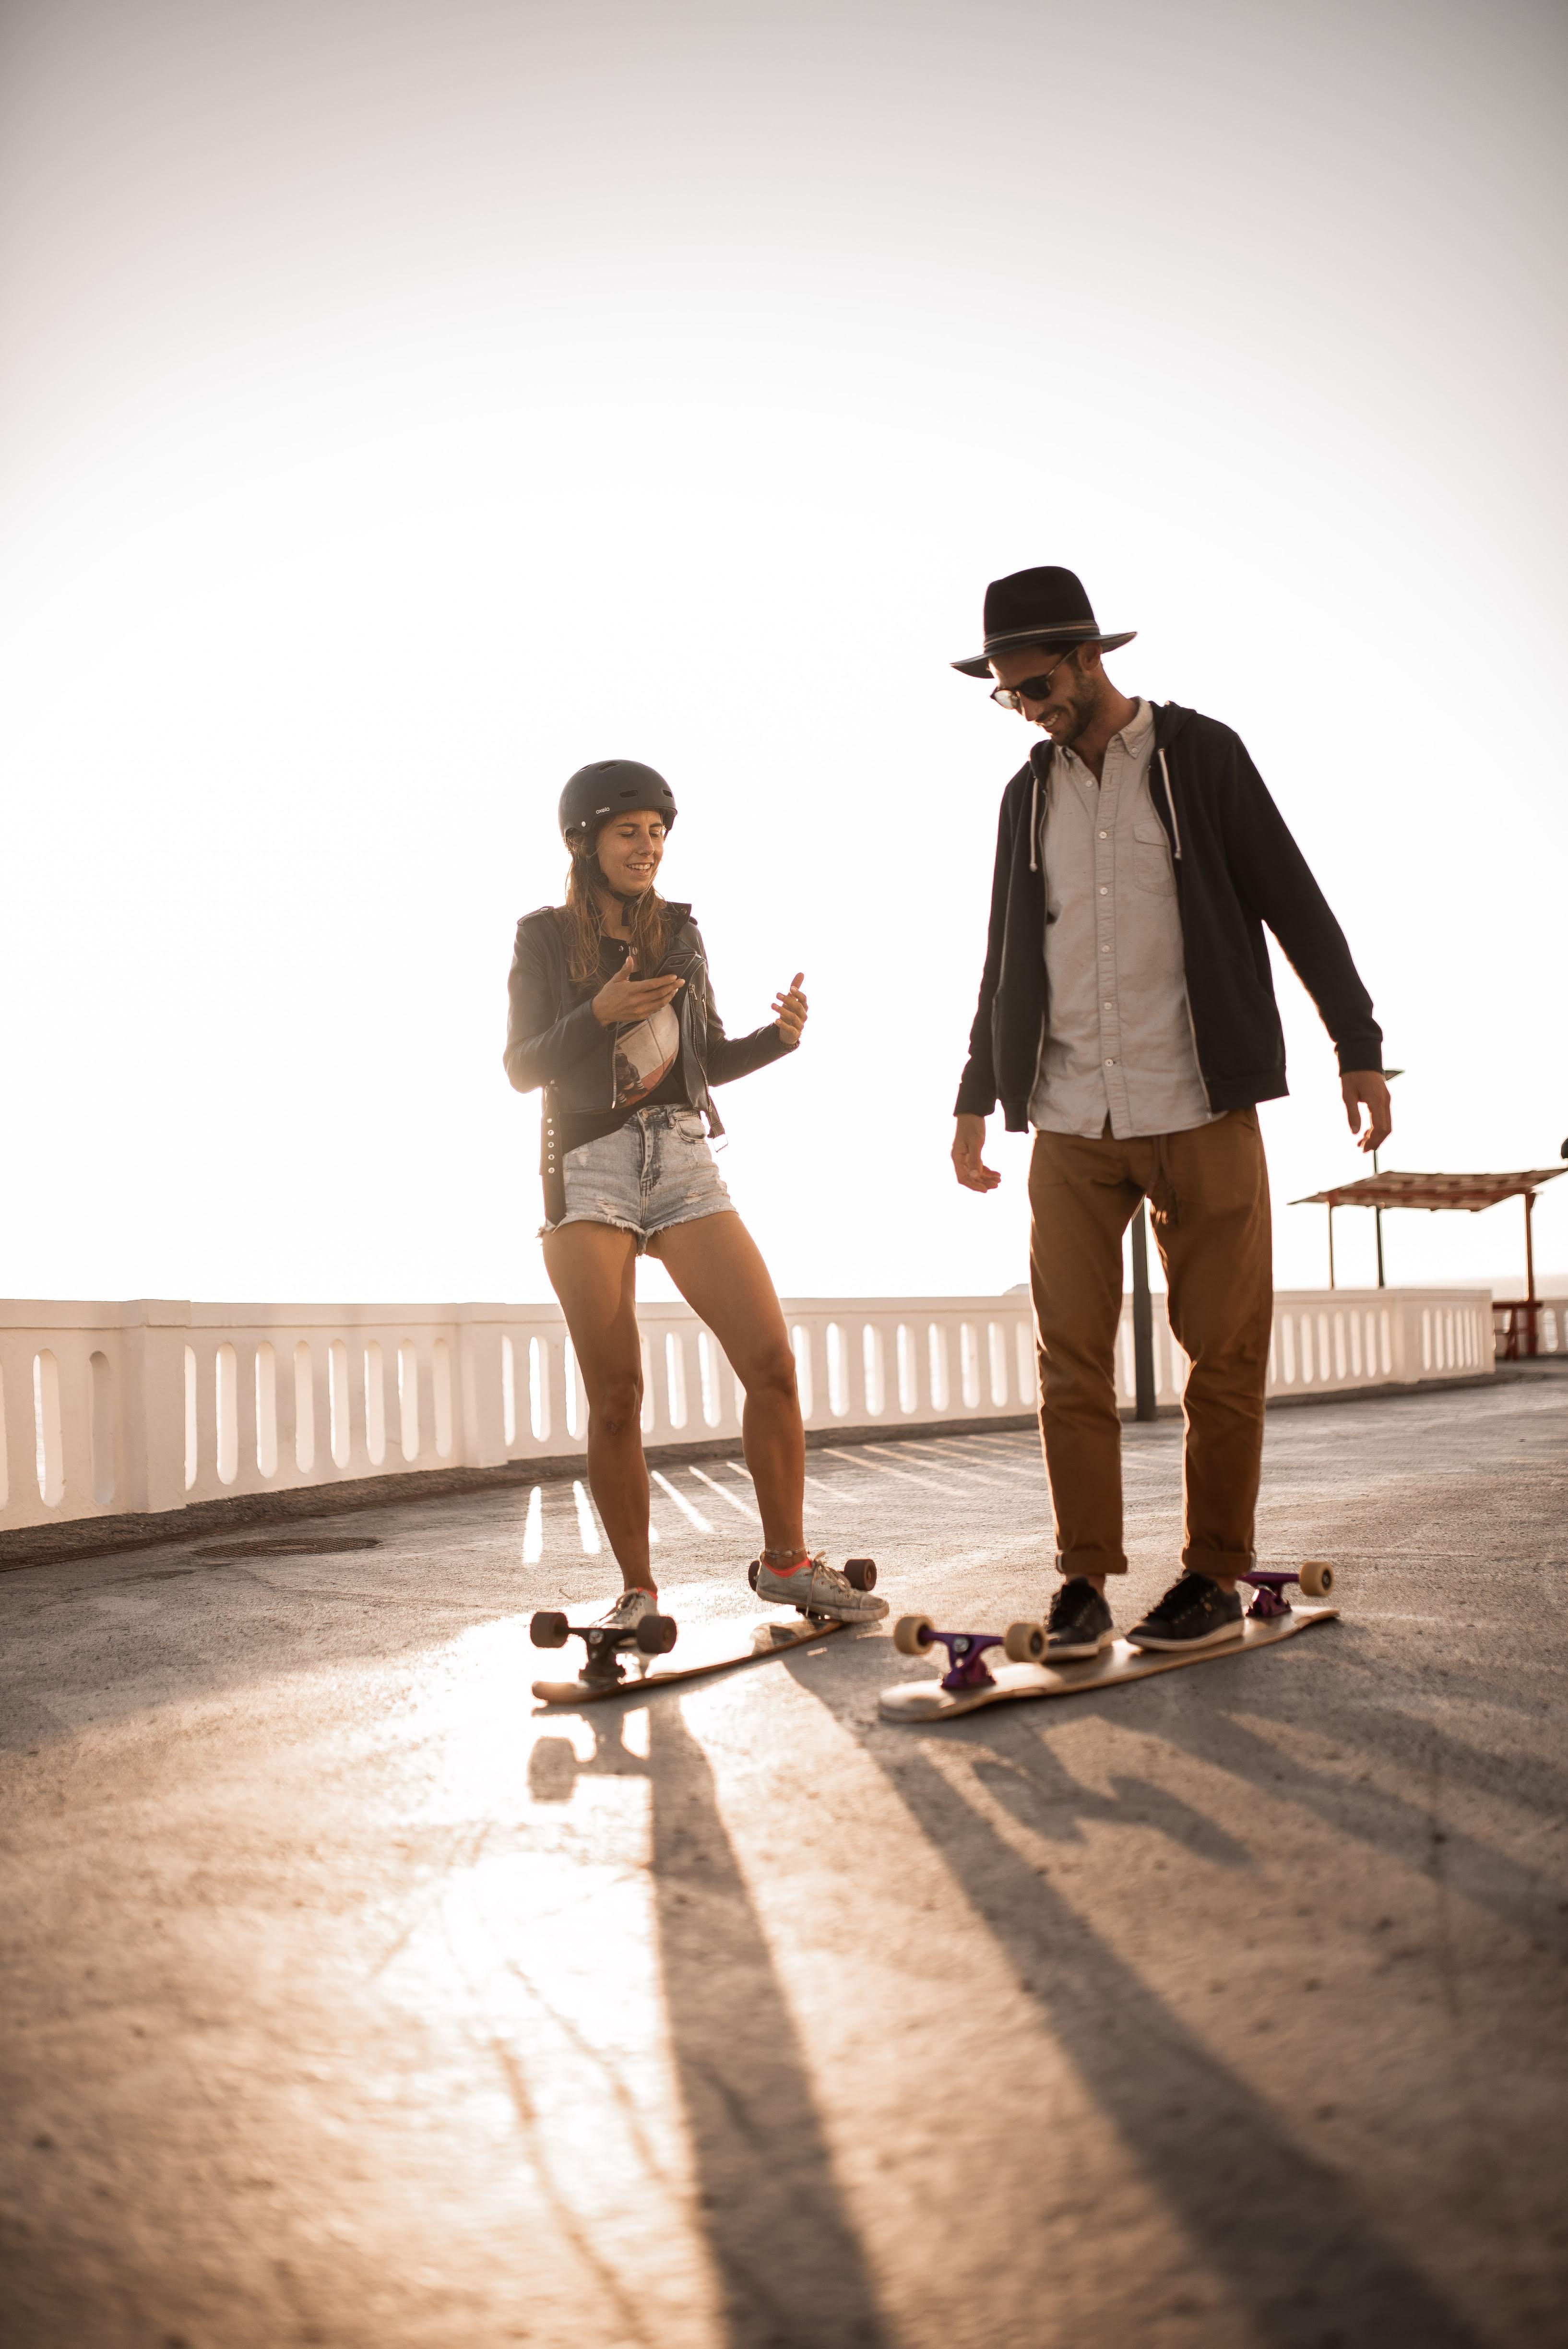 The Longboard Course - Learning